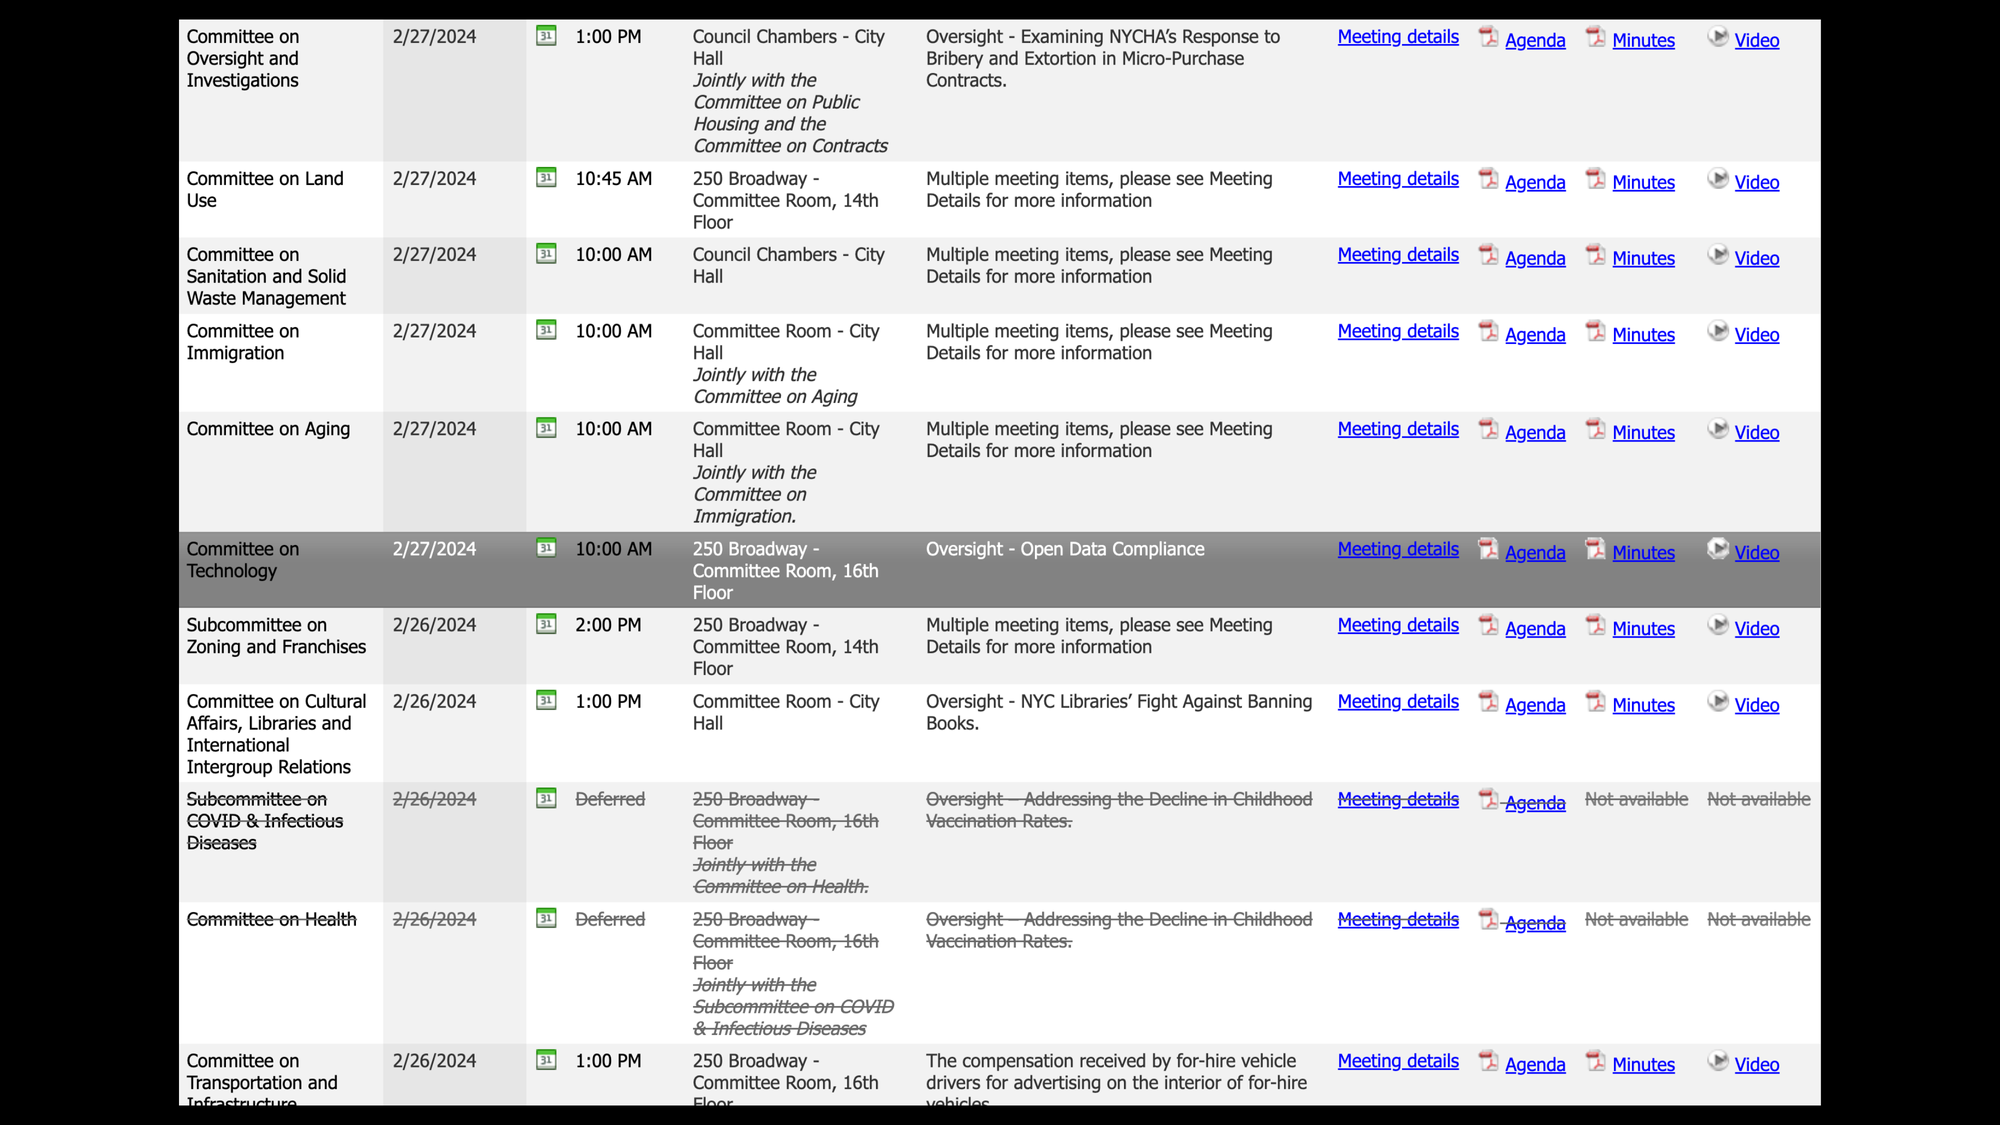 A screenshot of a table of meetings on nyc.legistar.com featuring 11 meetings by different committees. Every row has the committee name, the date/time/location of the meeting, a high-level description, and four links: Meeting Details, Agenda, Minutes, and Video.